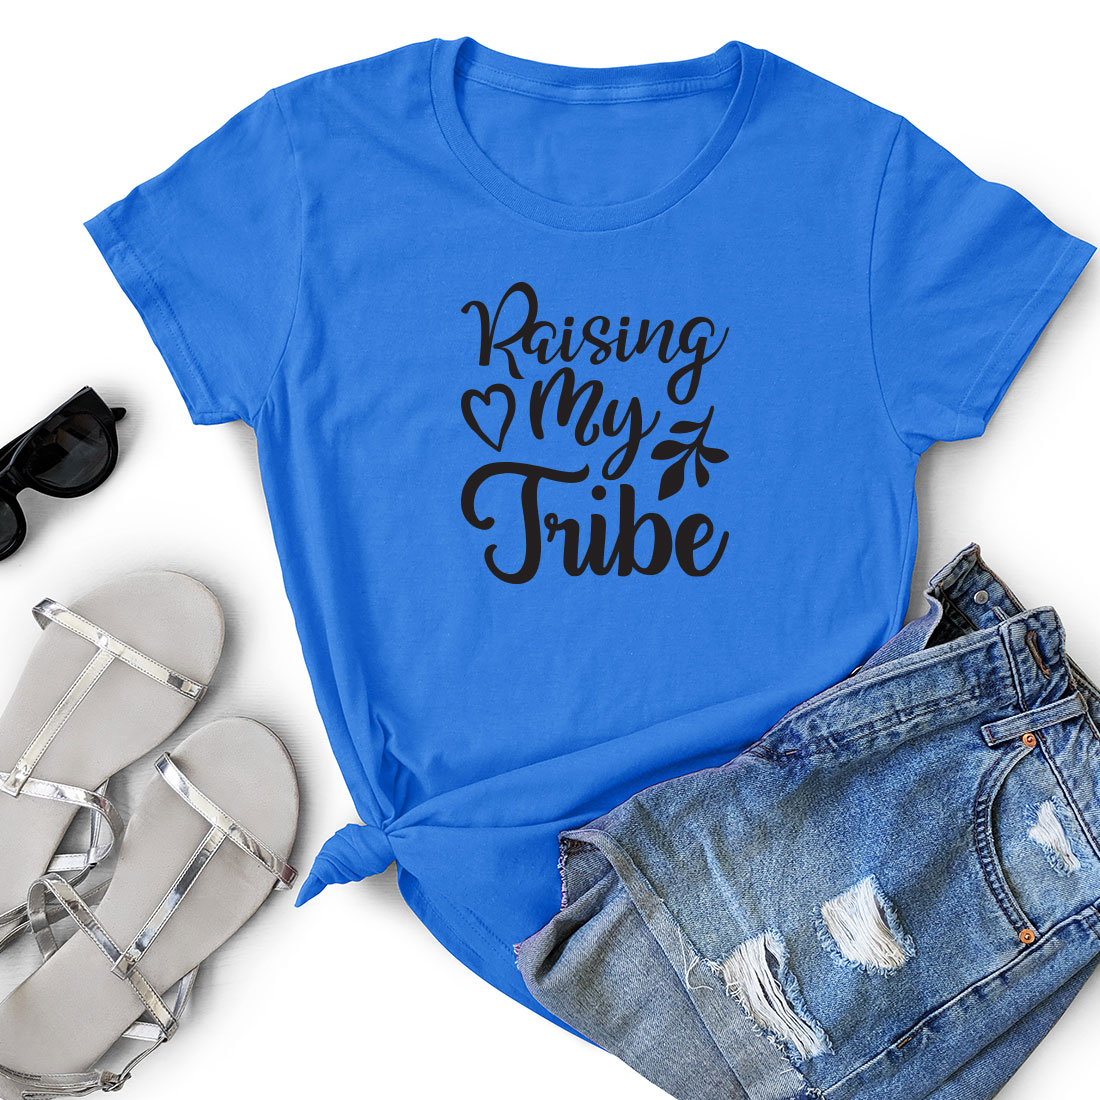 T - shirt that says raising my tribe next to a pair of shorts.